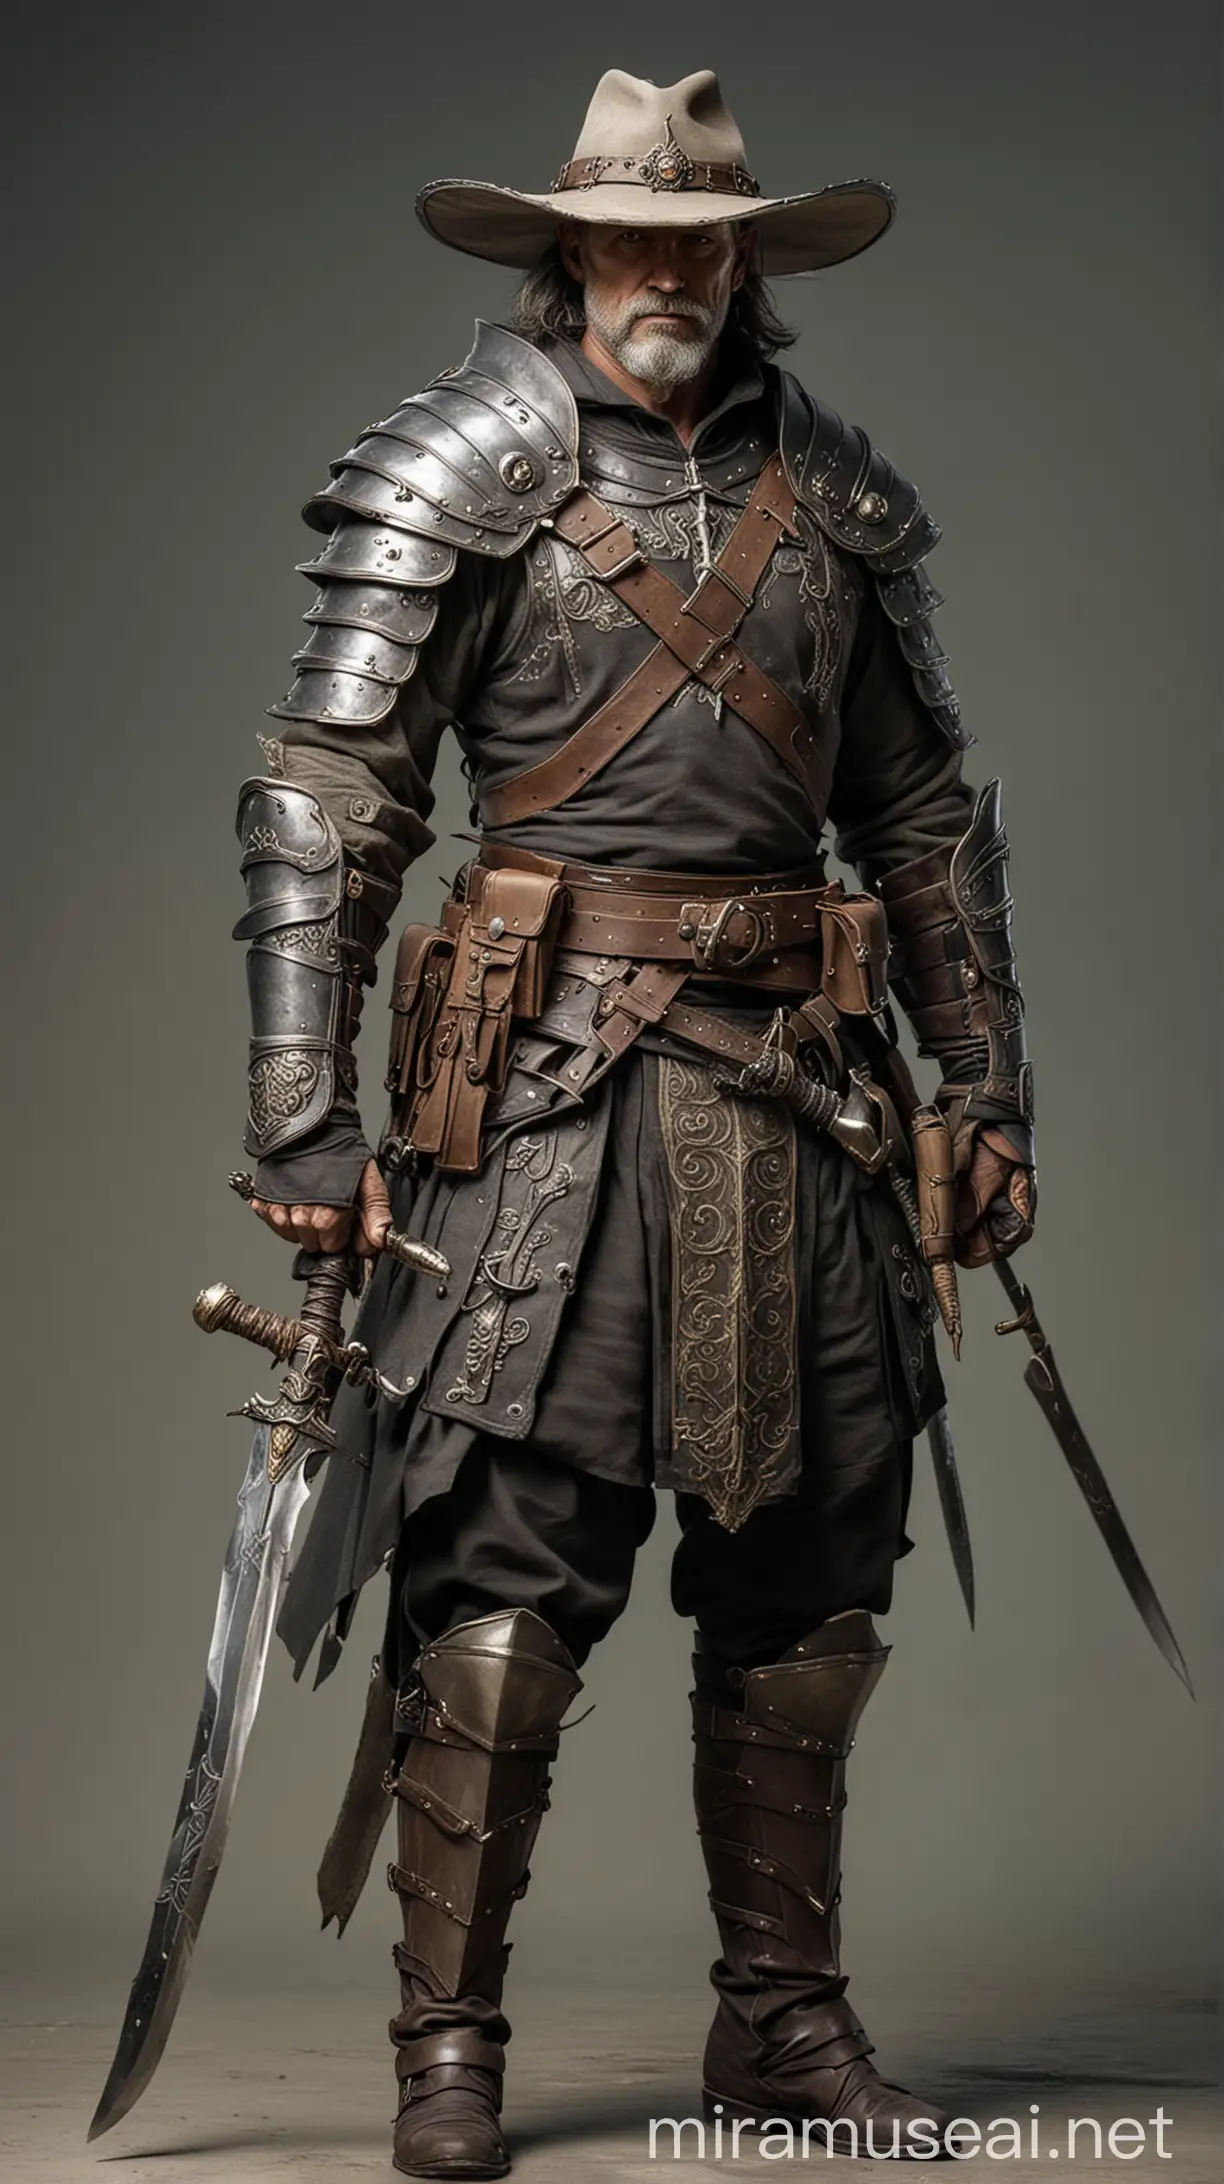 50 year old man with a hat and 2 swords and a light armor